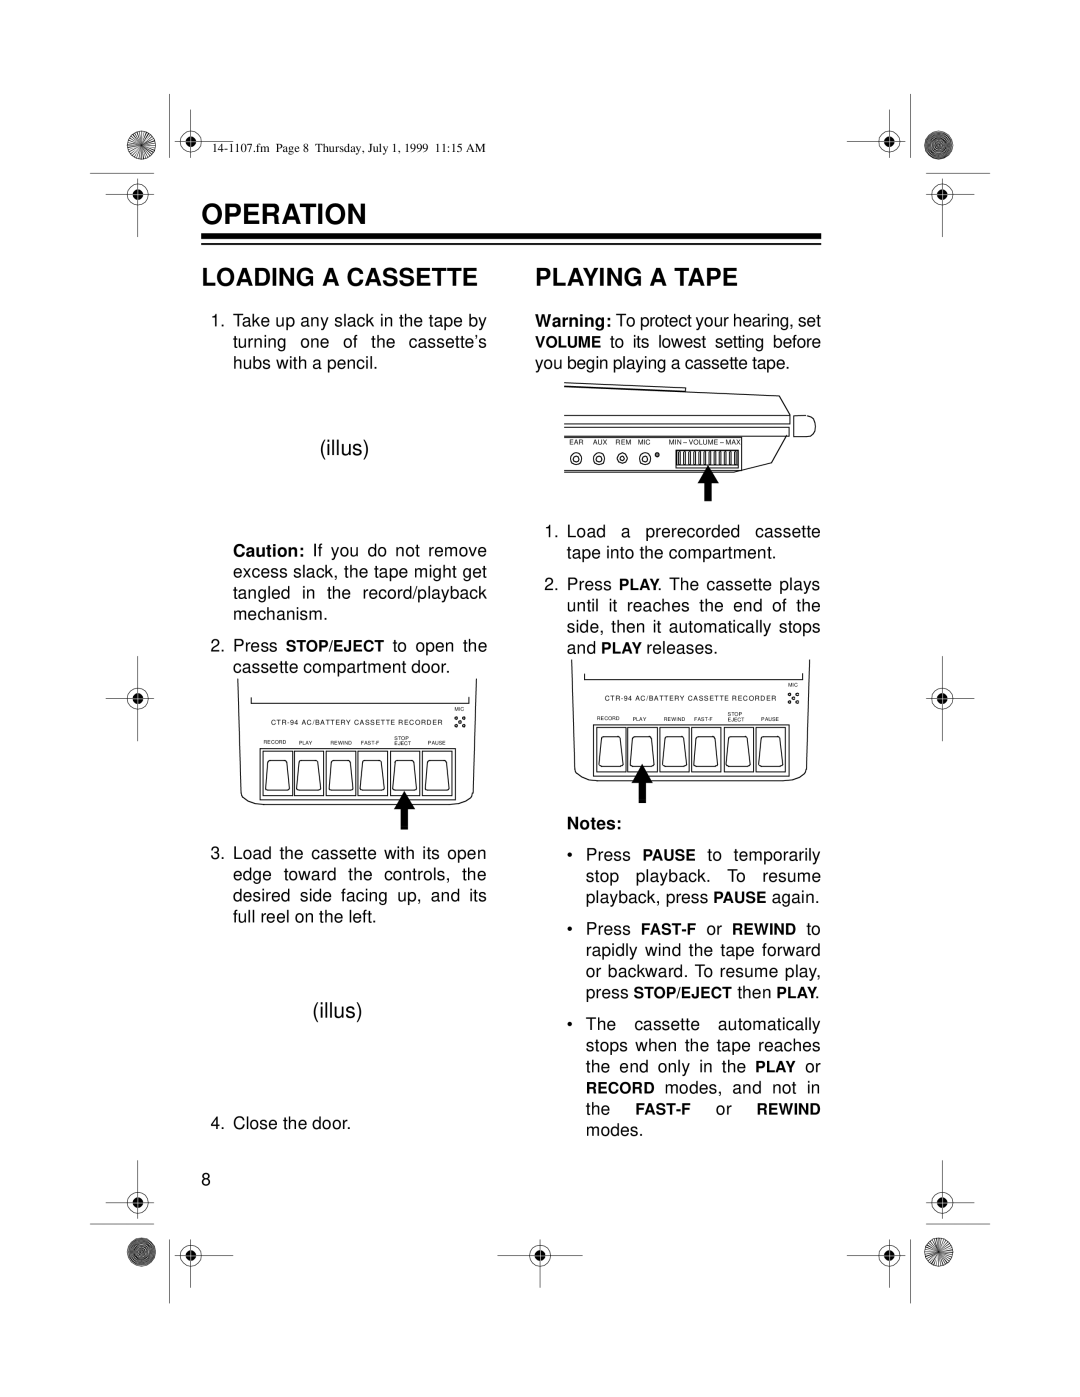 Radio Shack CTR-94, 14-1107A owner manual Operation, Loading A Cassette, Playing A Tape, illus 